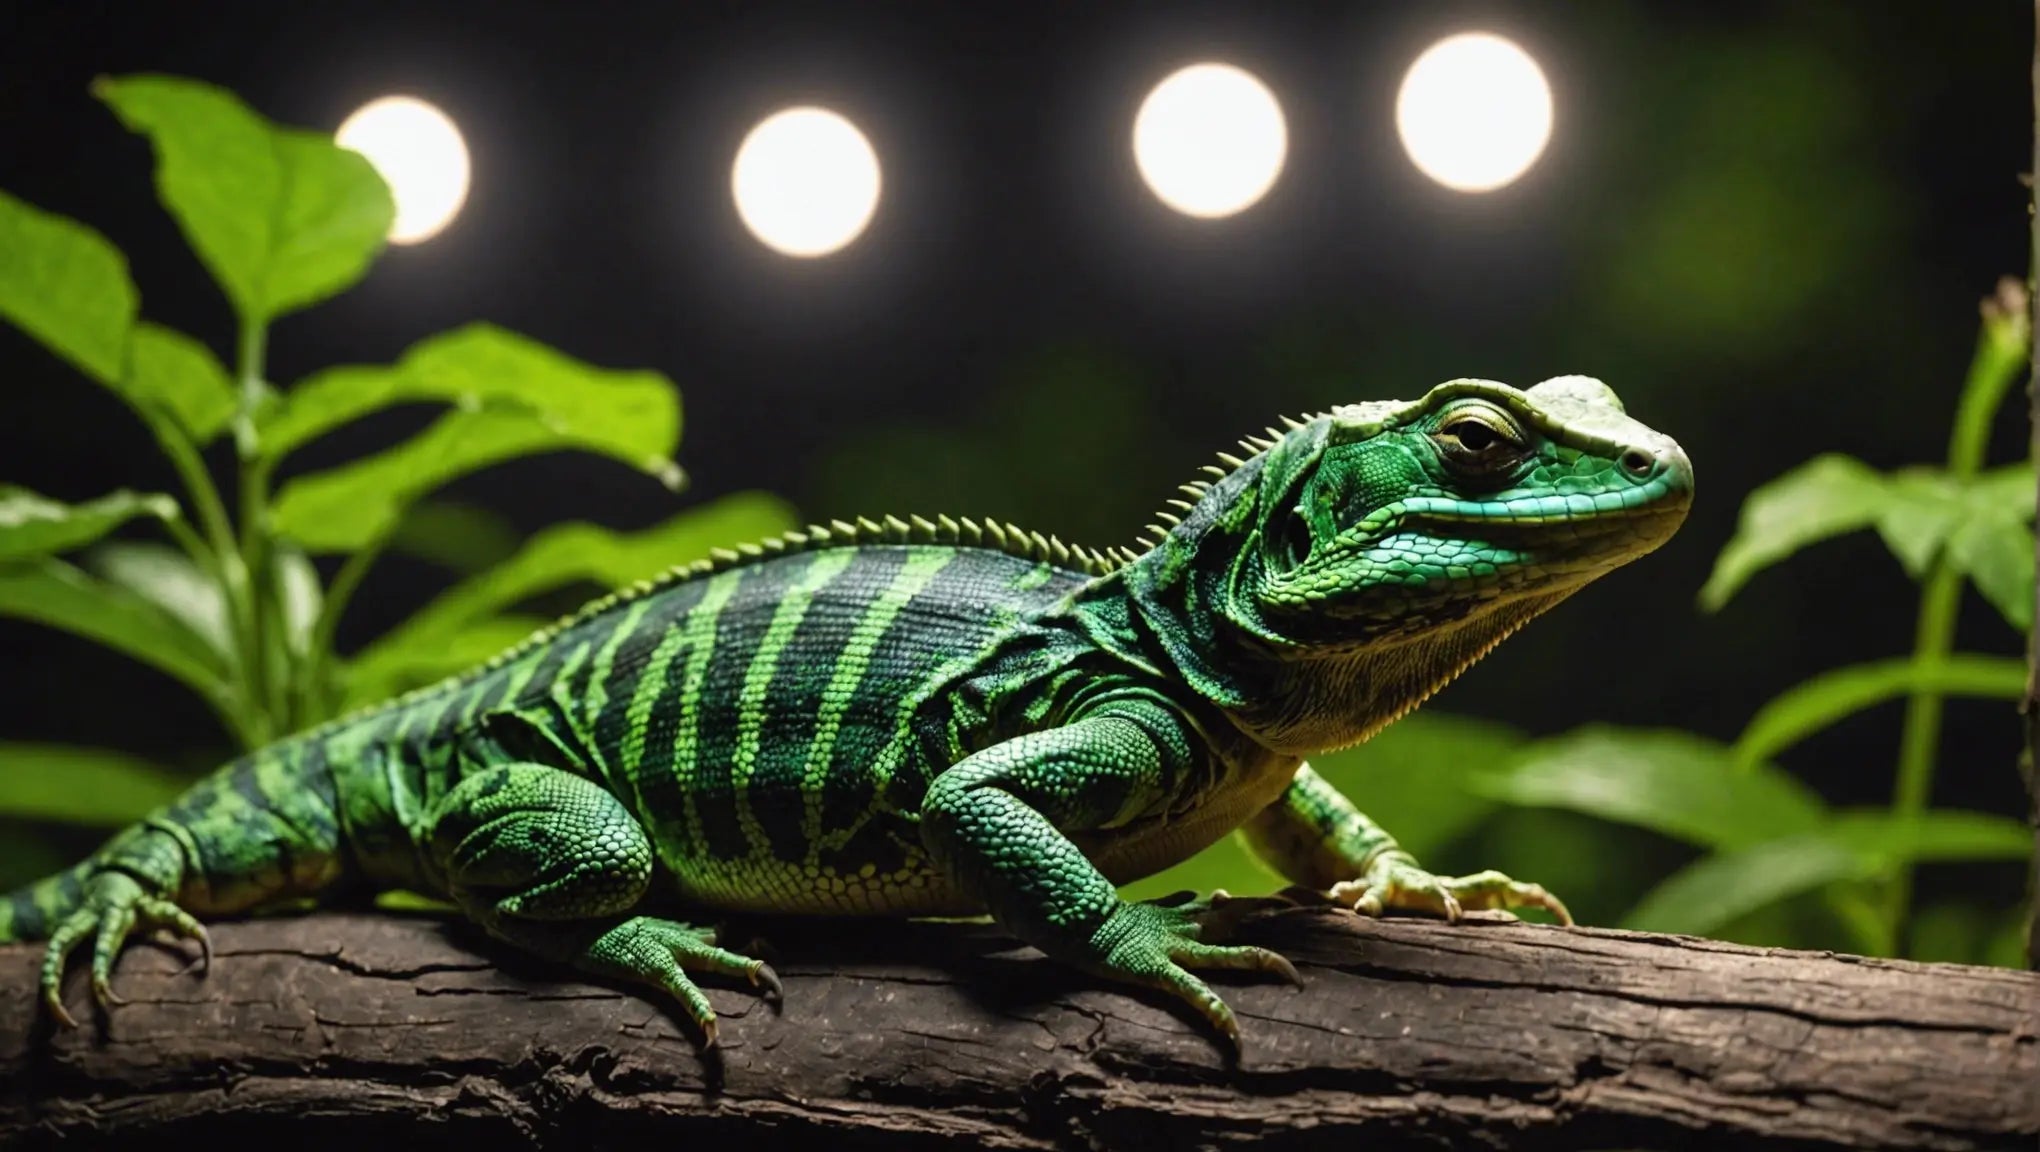 The Best Reptile Lights for a Healthy Habitat